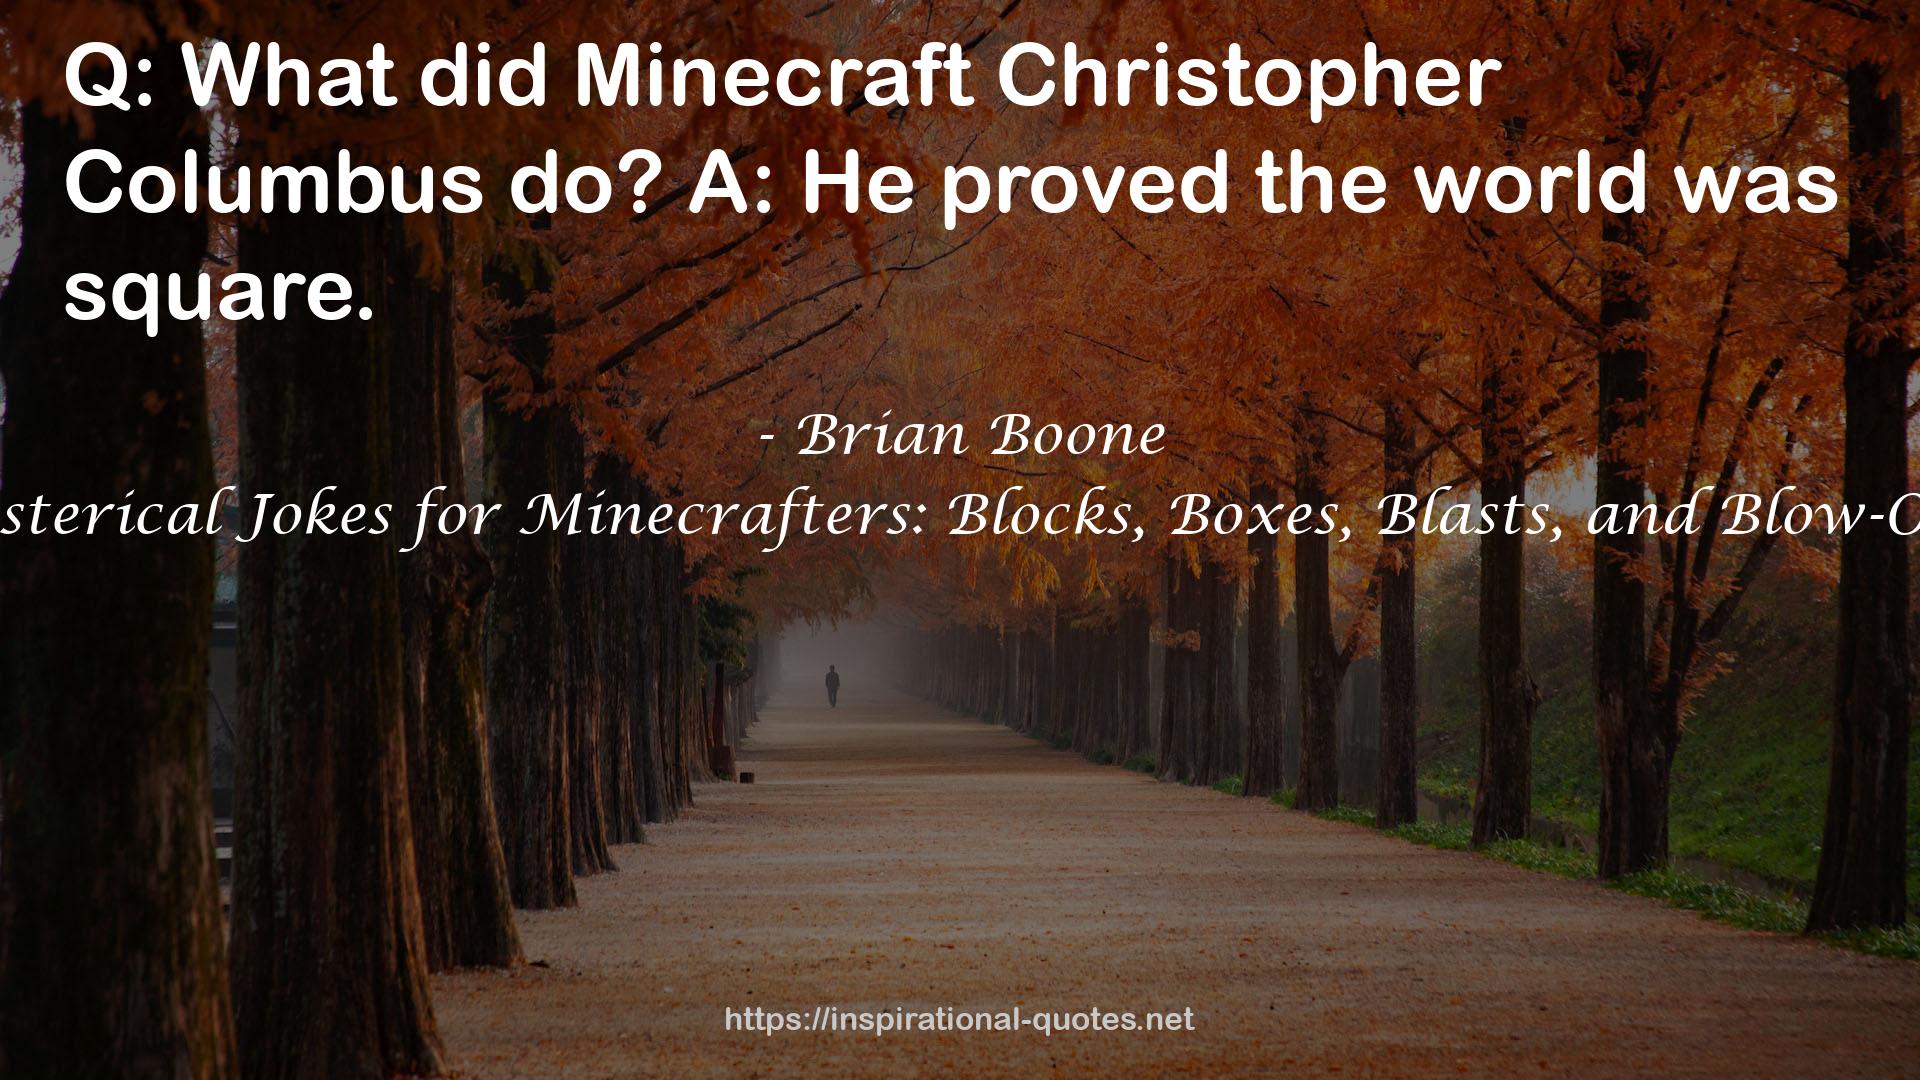 Hysterical Jokes for Minecrafters: Blocks, Boxes, Blasts, and Blow-Outs QUOTES